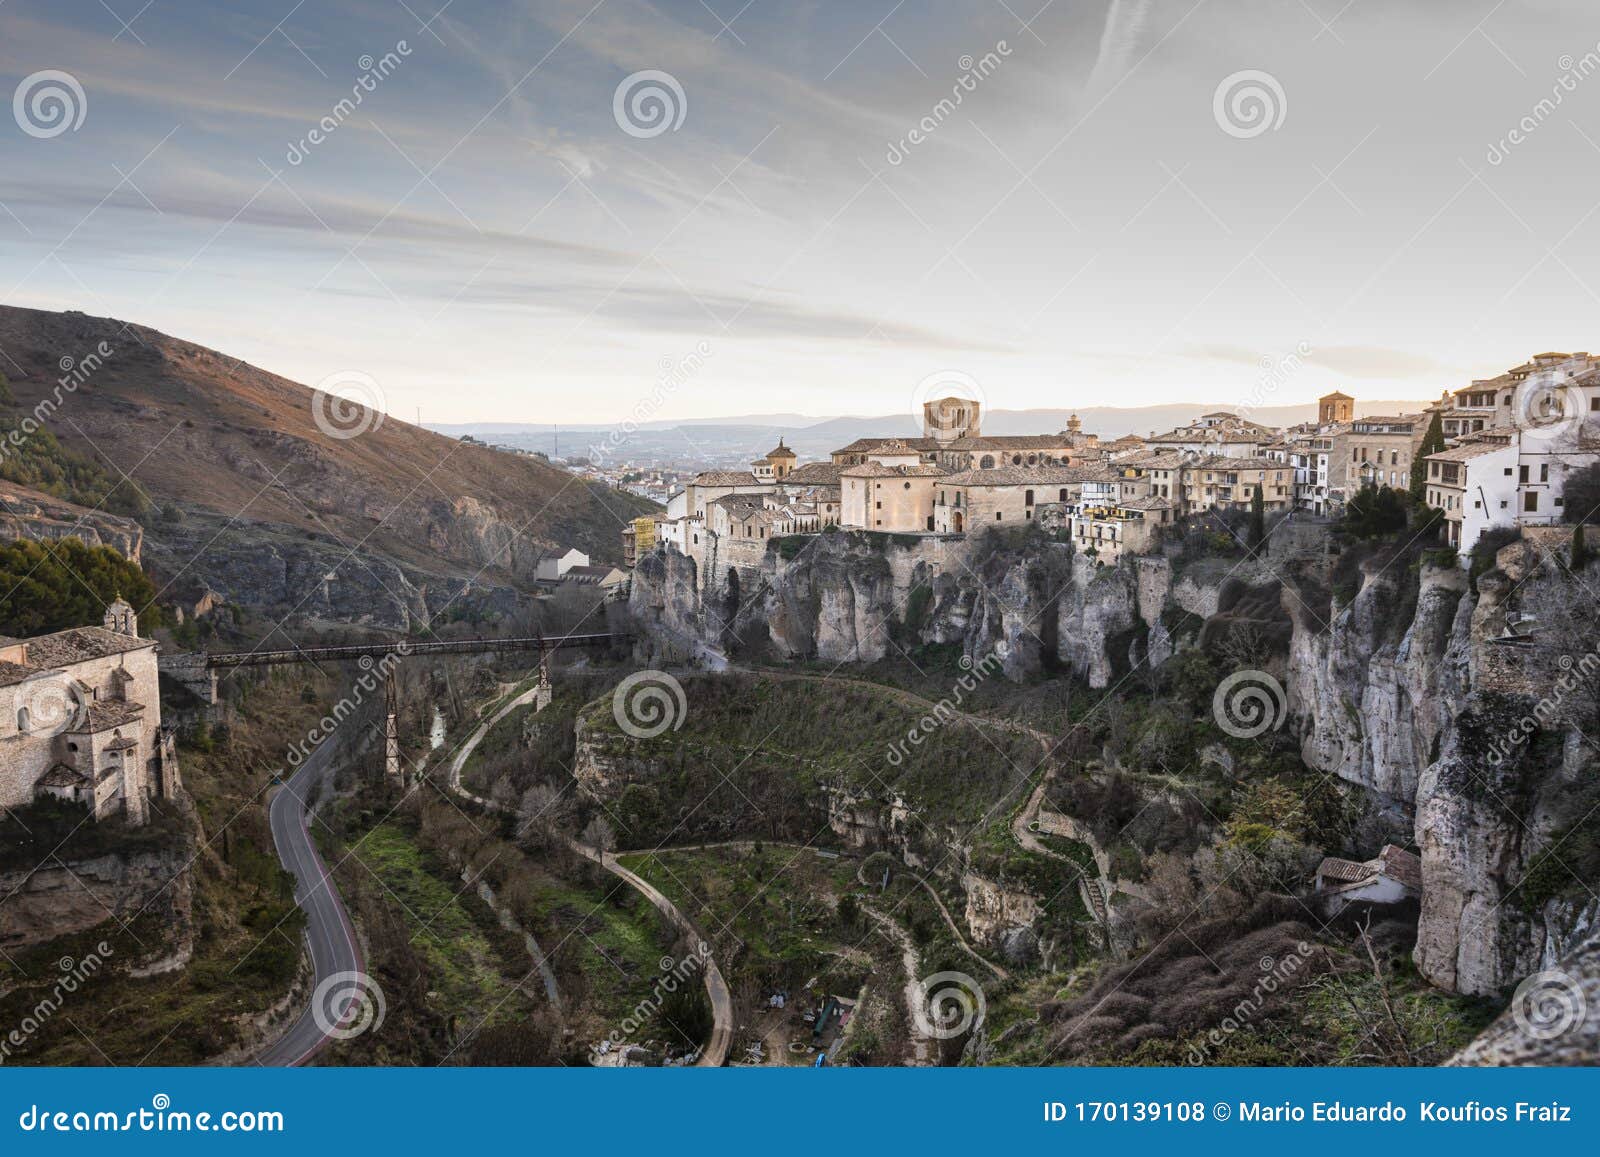 panoramic view of cuenca city and the cliffs of the huecar river gorge. europe spain